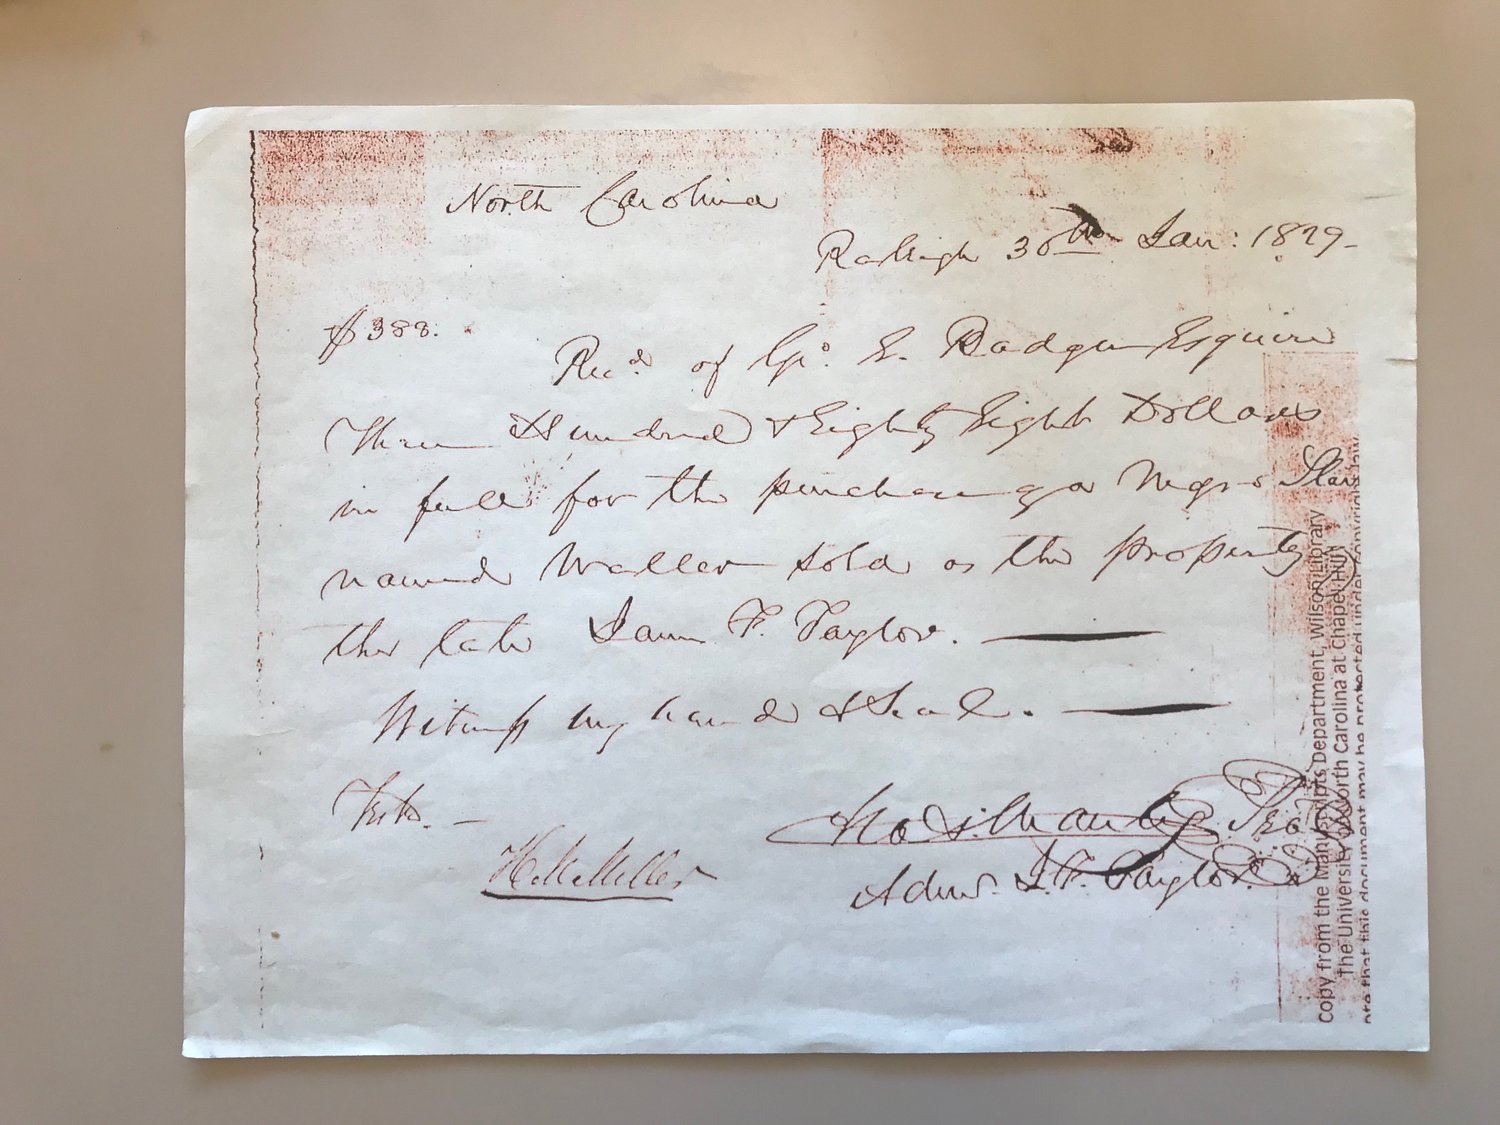 The Bill of Sale documenting the purchase of Waller, Lewis Freeman's son, from the estate of James Taylor in 1829 in Raleigh by Judge George Badger. The price was $388. .Badger later became a Cabinet member in 1842 under President Harrison.